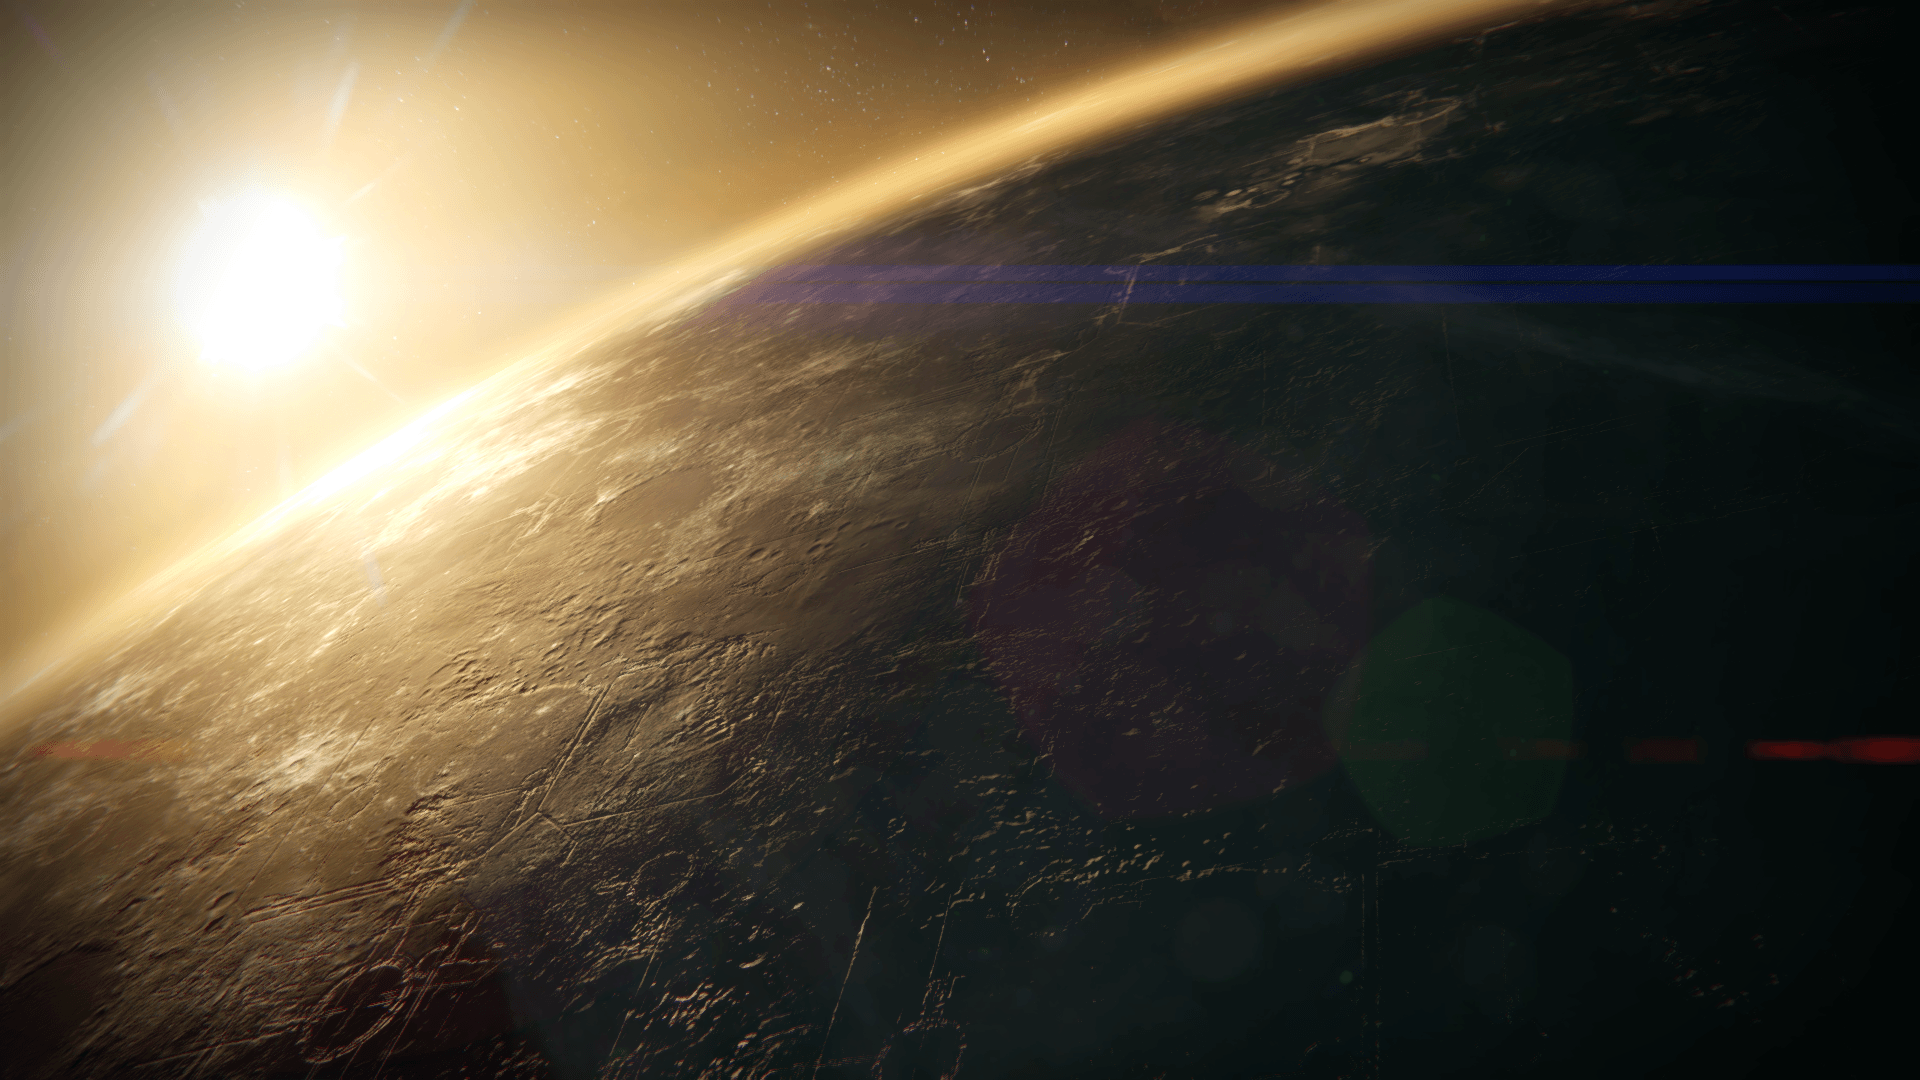 Wallpaper of the 6 areas we can orbit